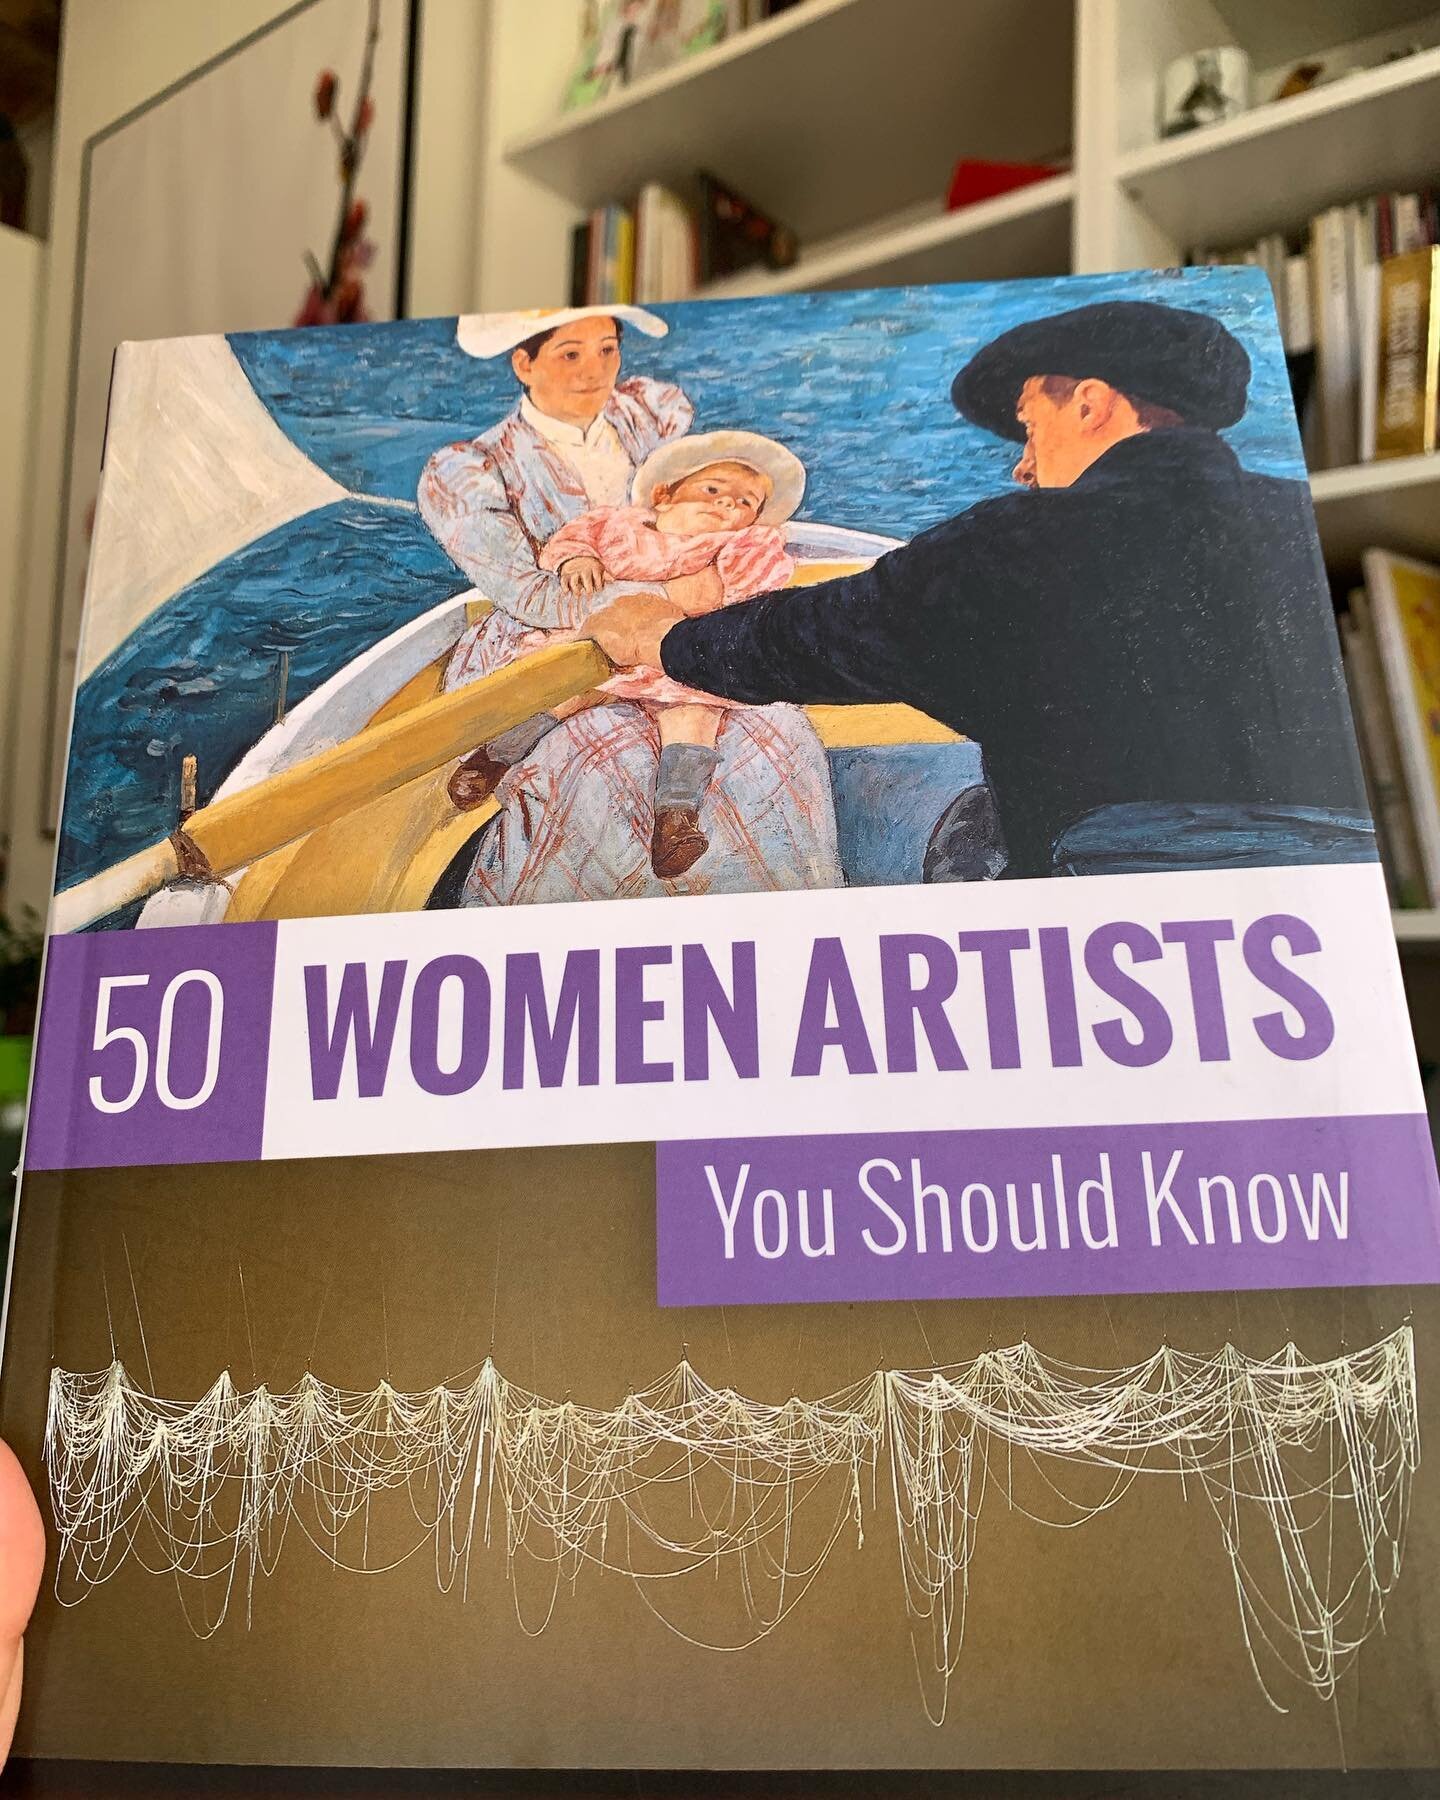 Ping: love to have #50womenartistsyoushouldknow written by Christiane Weidemann, Petra Larass and Melanie Klier and published by @prestel_publishing to read during the summer. This book presents the women from history to post modern days their achiev